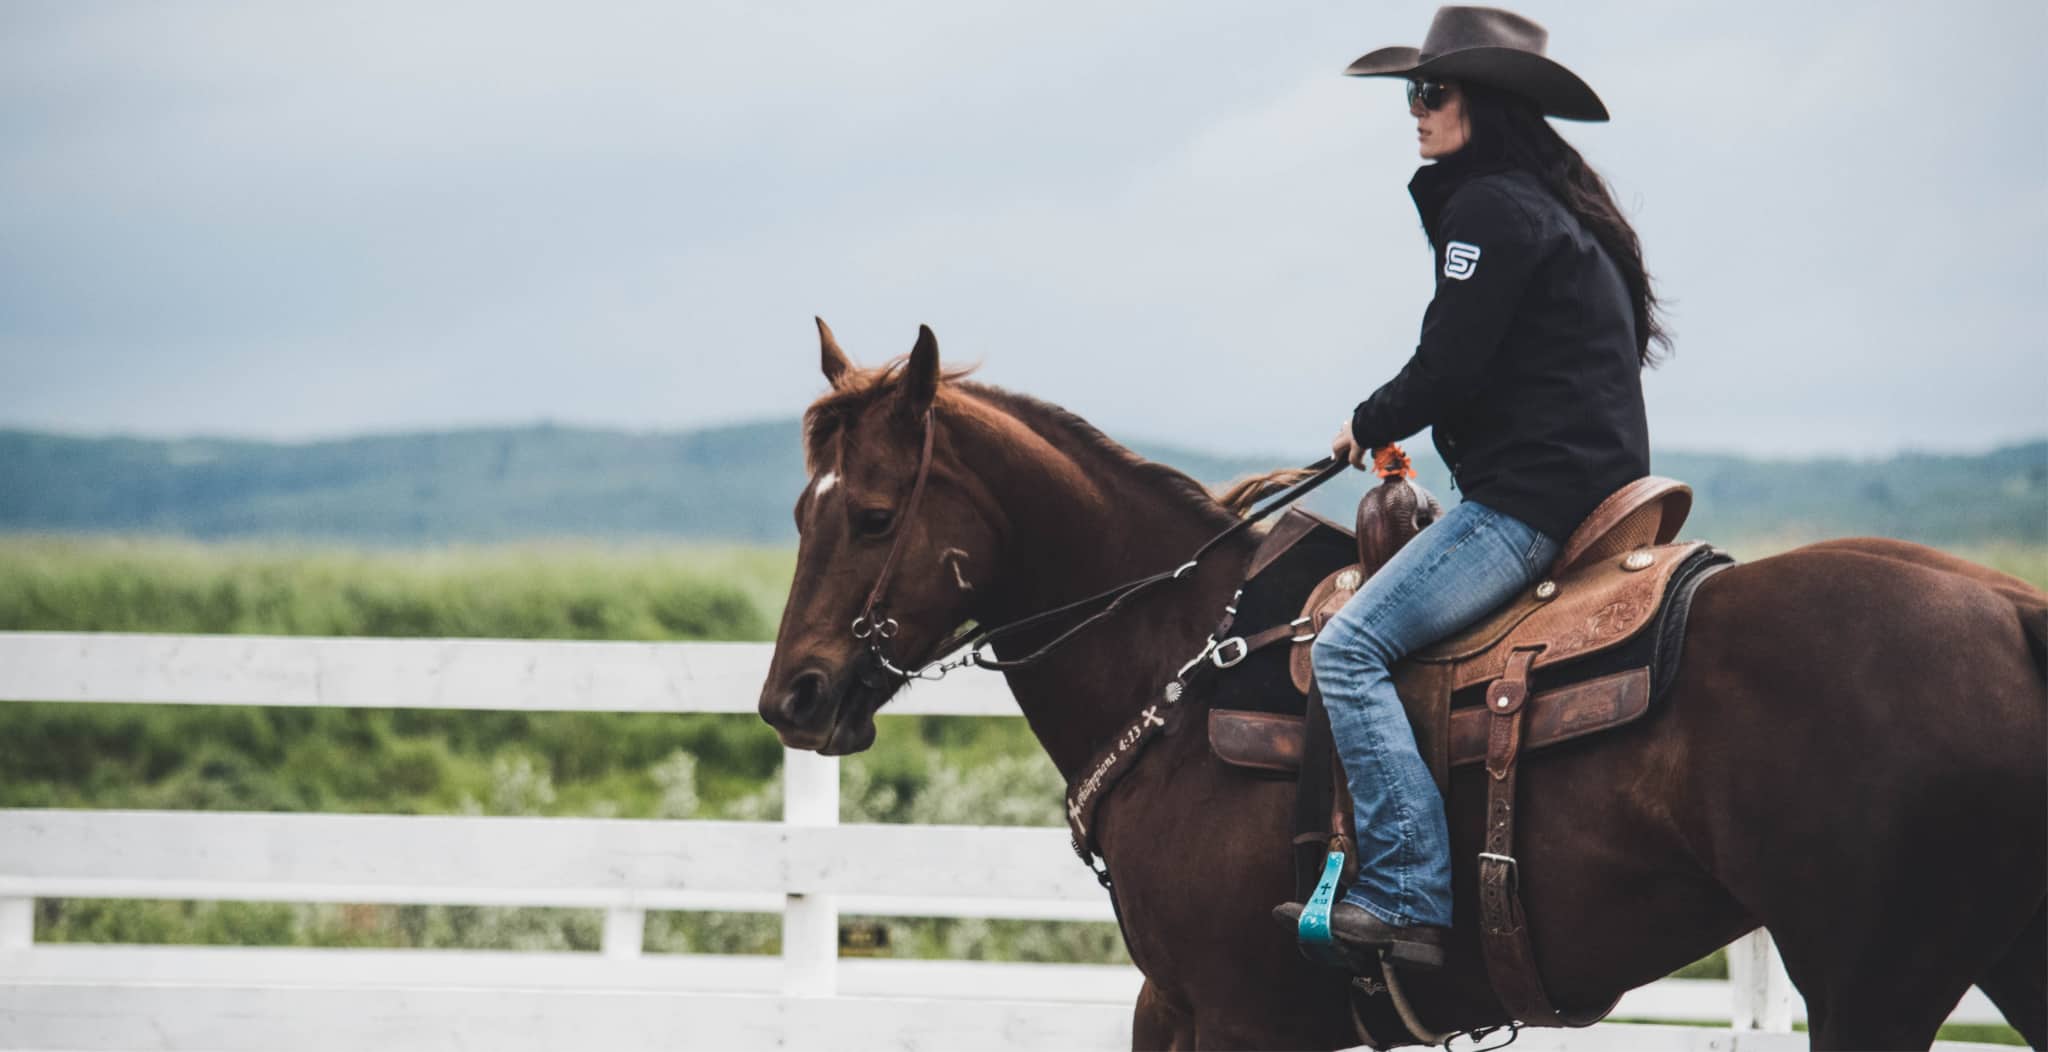 Amara Finnerty is a professional barrel racer who competes at the highest level in Canada with her horse Dragon, proudly supported by StreamZ Advanced Magnetic Therapy. 